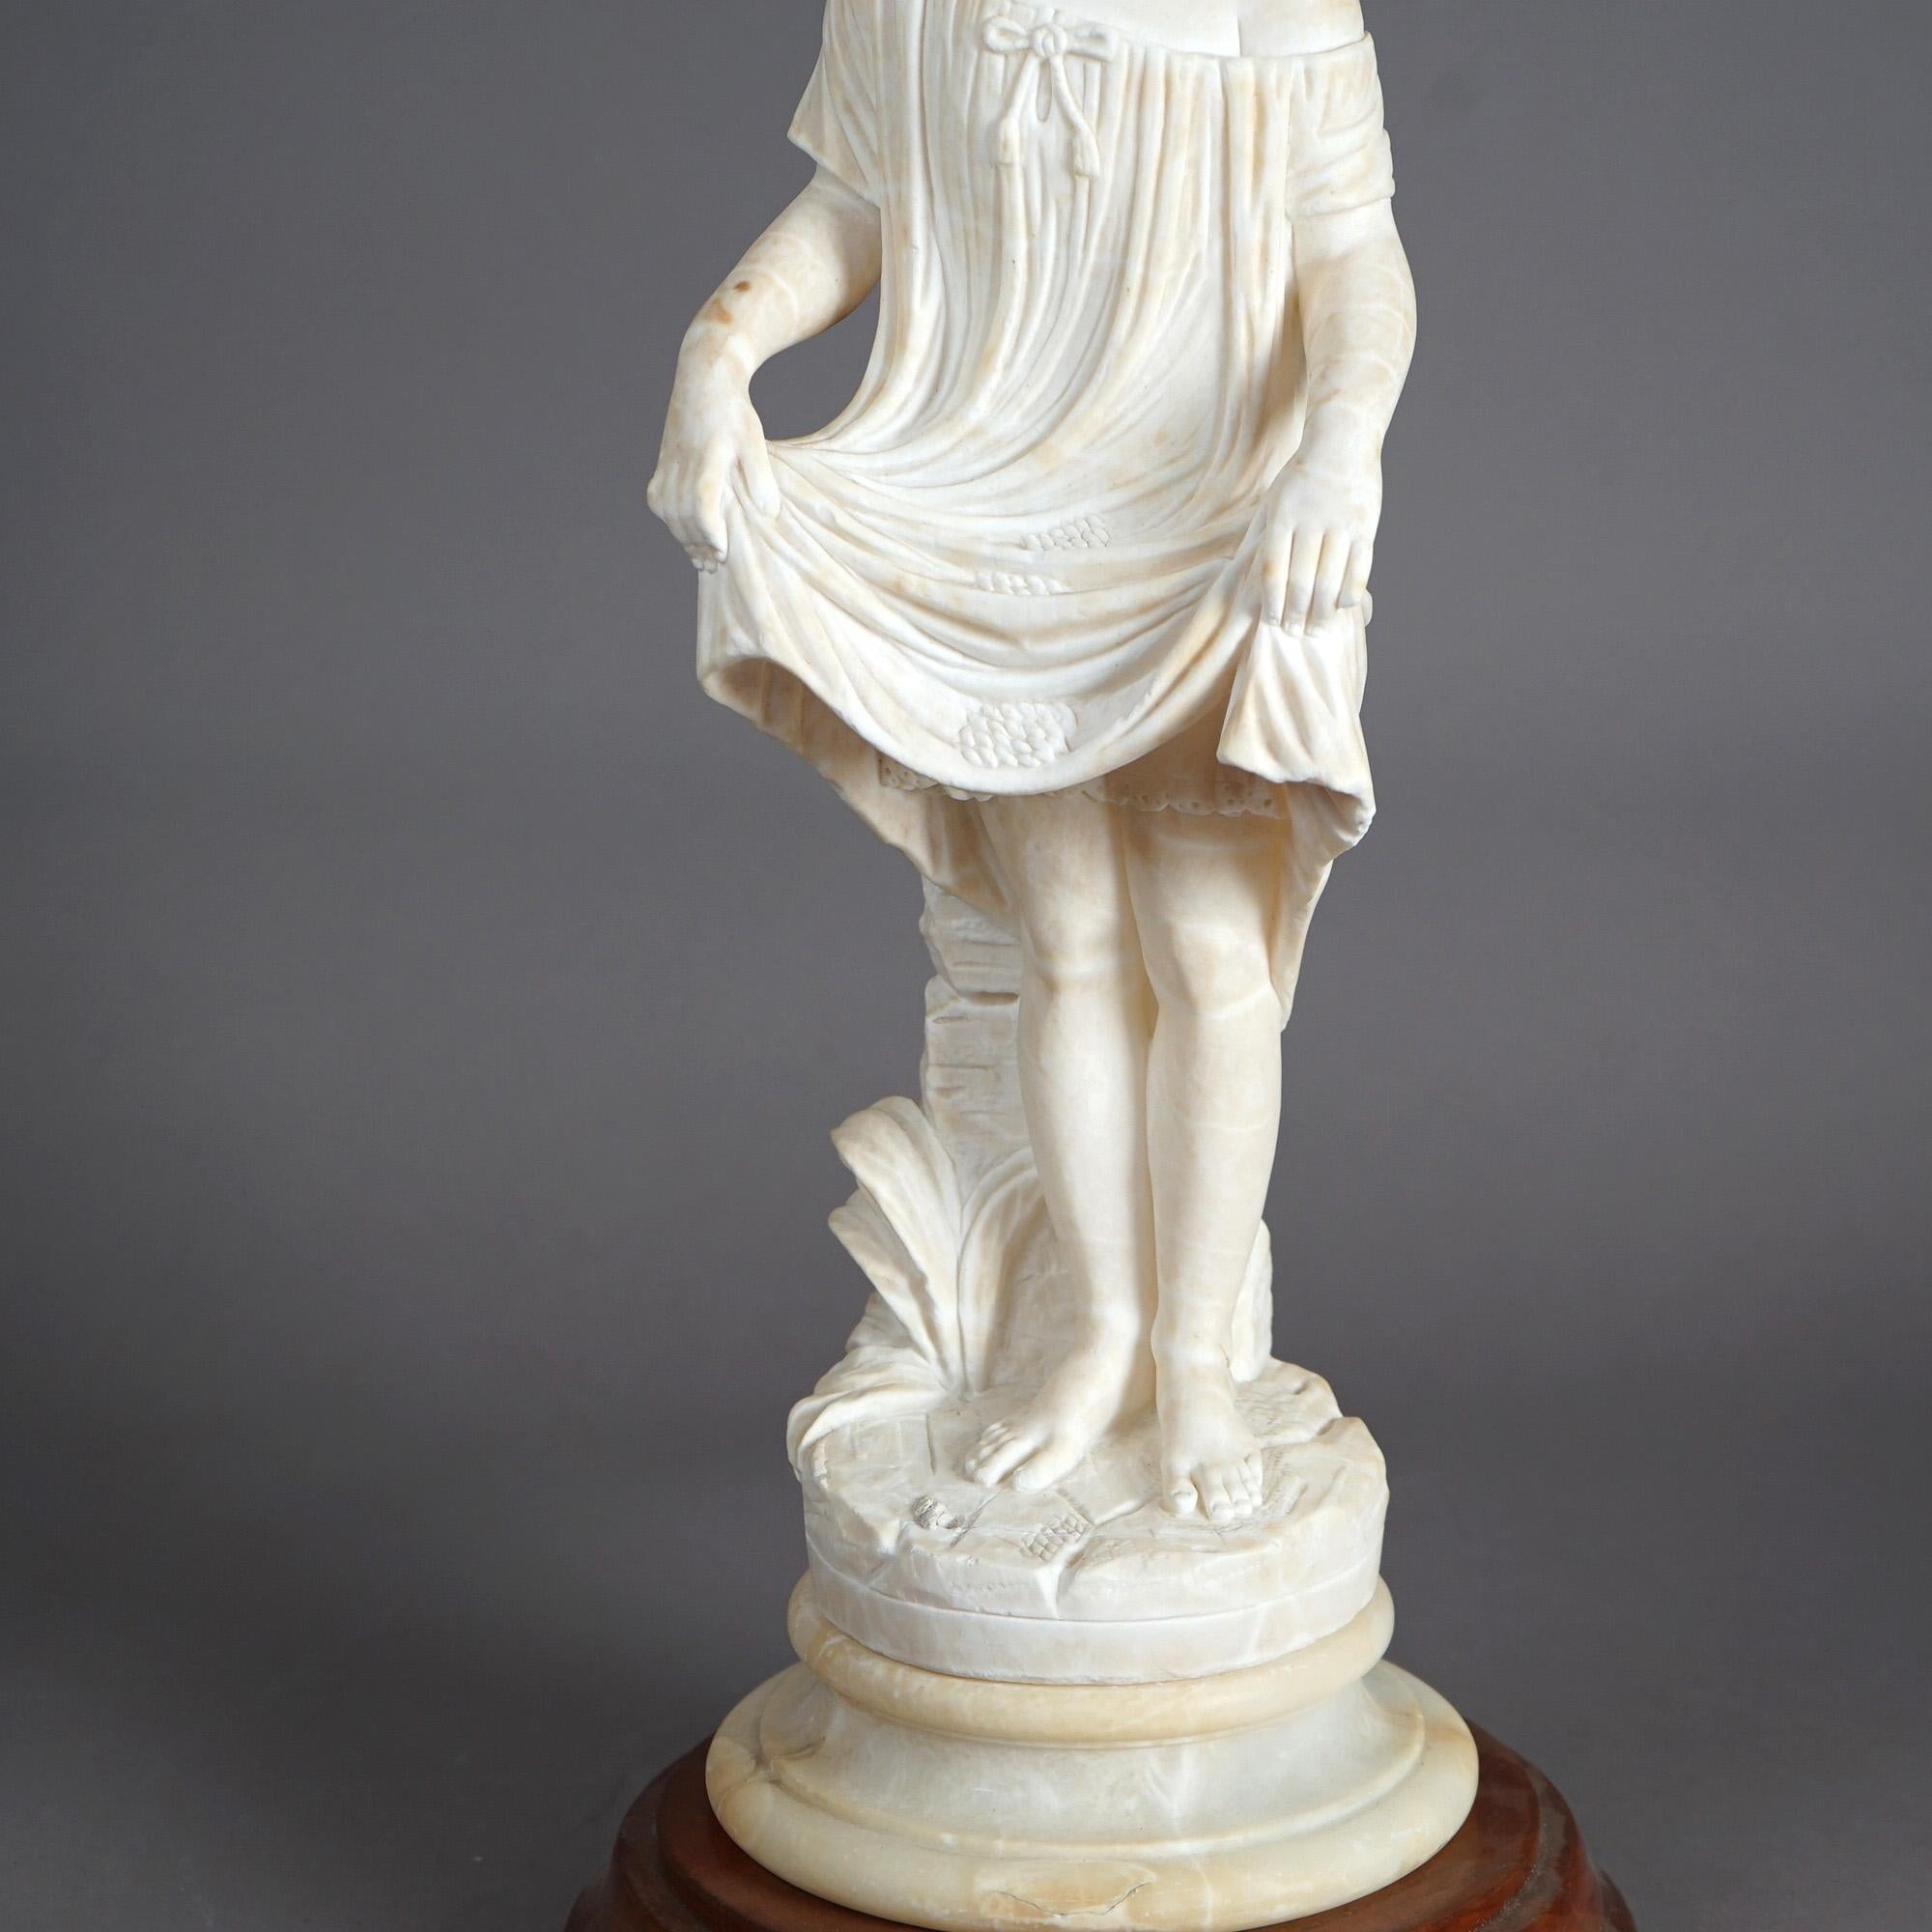 19th Century Antique Classical Carved Alabaster Sculpture of a Young Girl 19th C